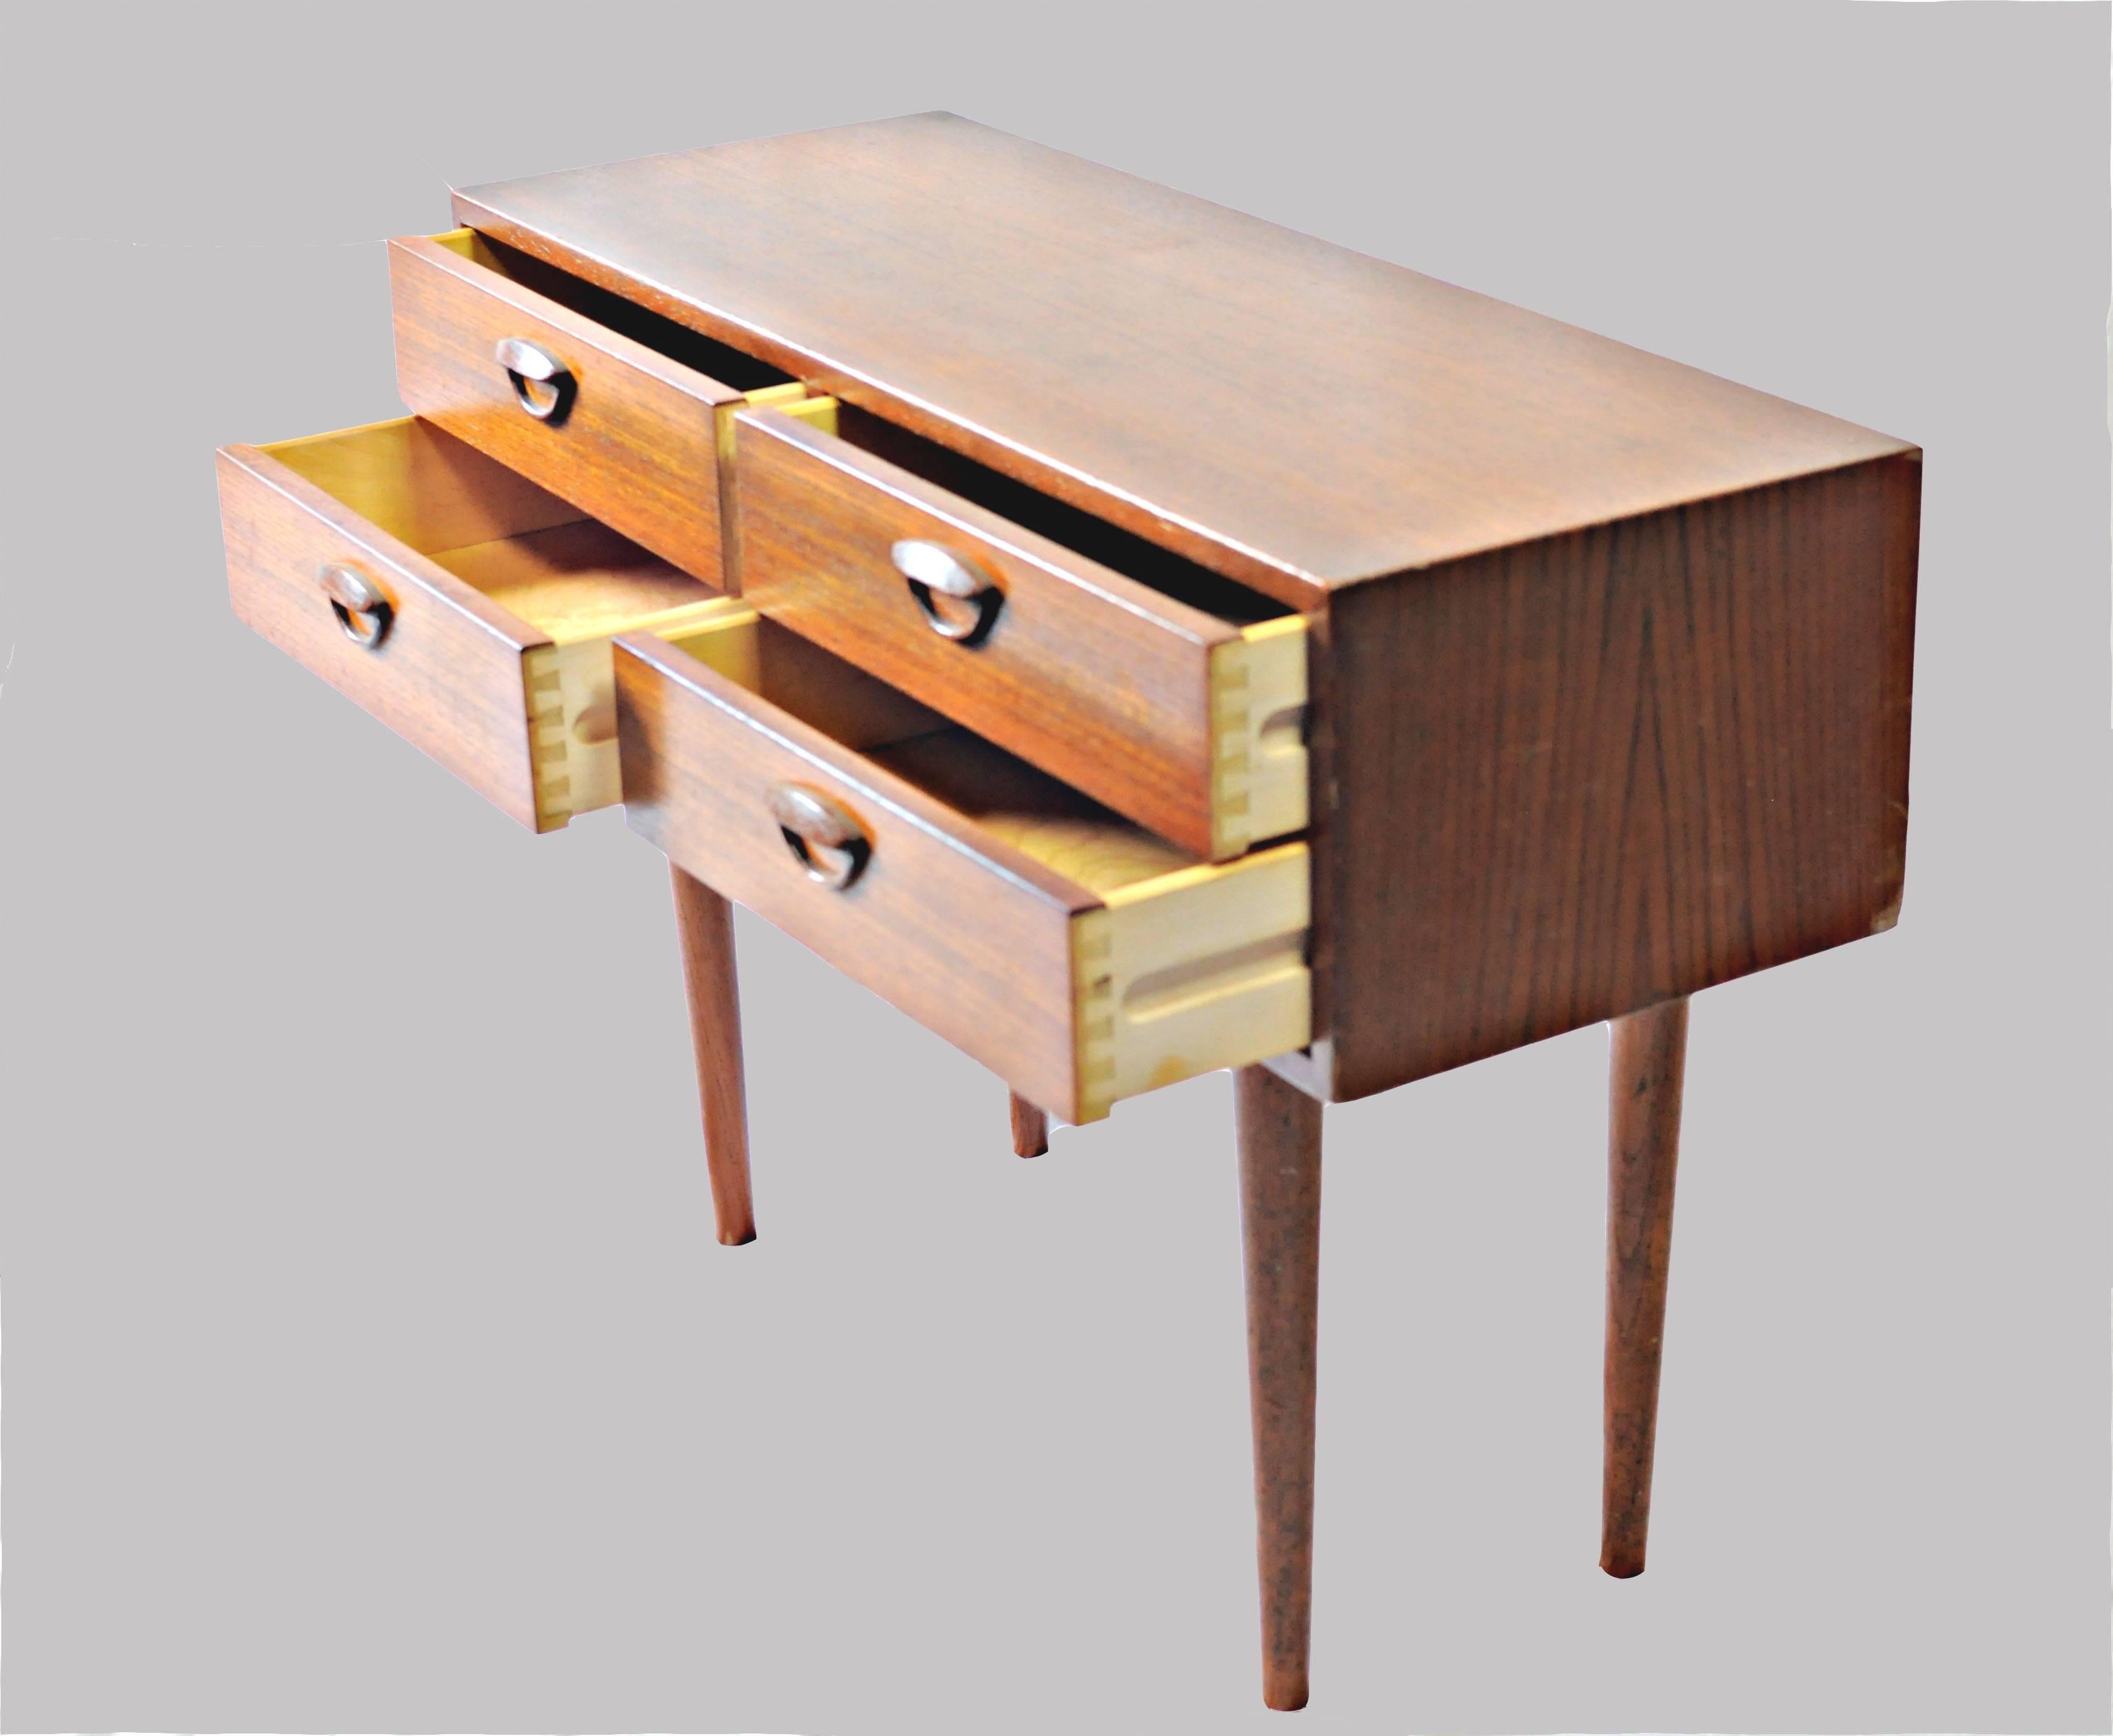 Small Danish teak dresser or console with four small drawers designed by Kai Kristiansen for Feldballe Møbelfabrik in the late 1950s.

The dresser / console features Kai Kristiansens classic eyelid design on each drawer pull and it´s seize and